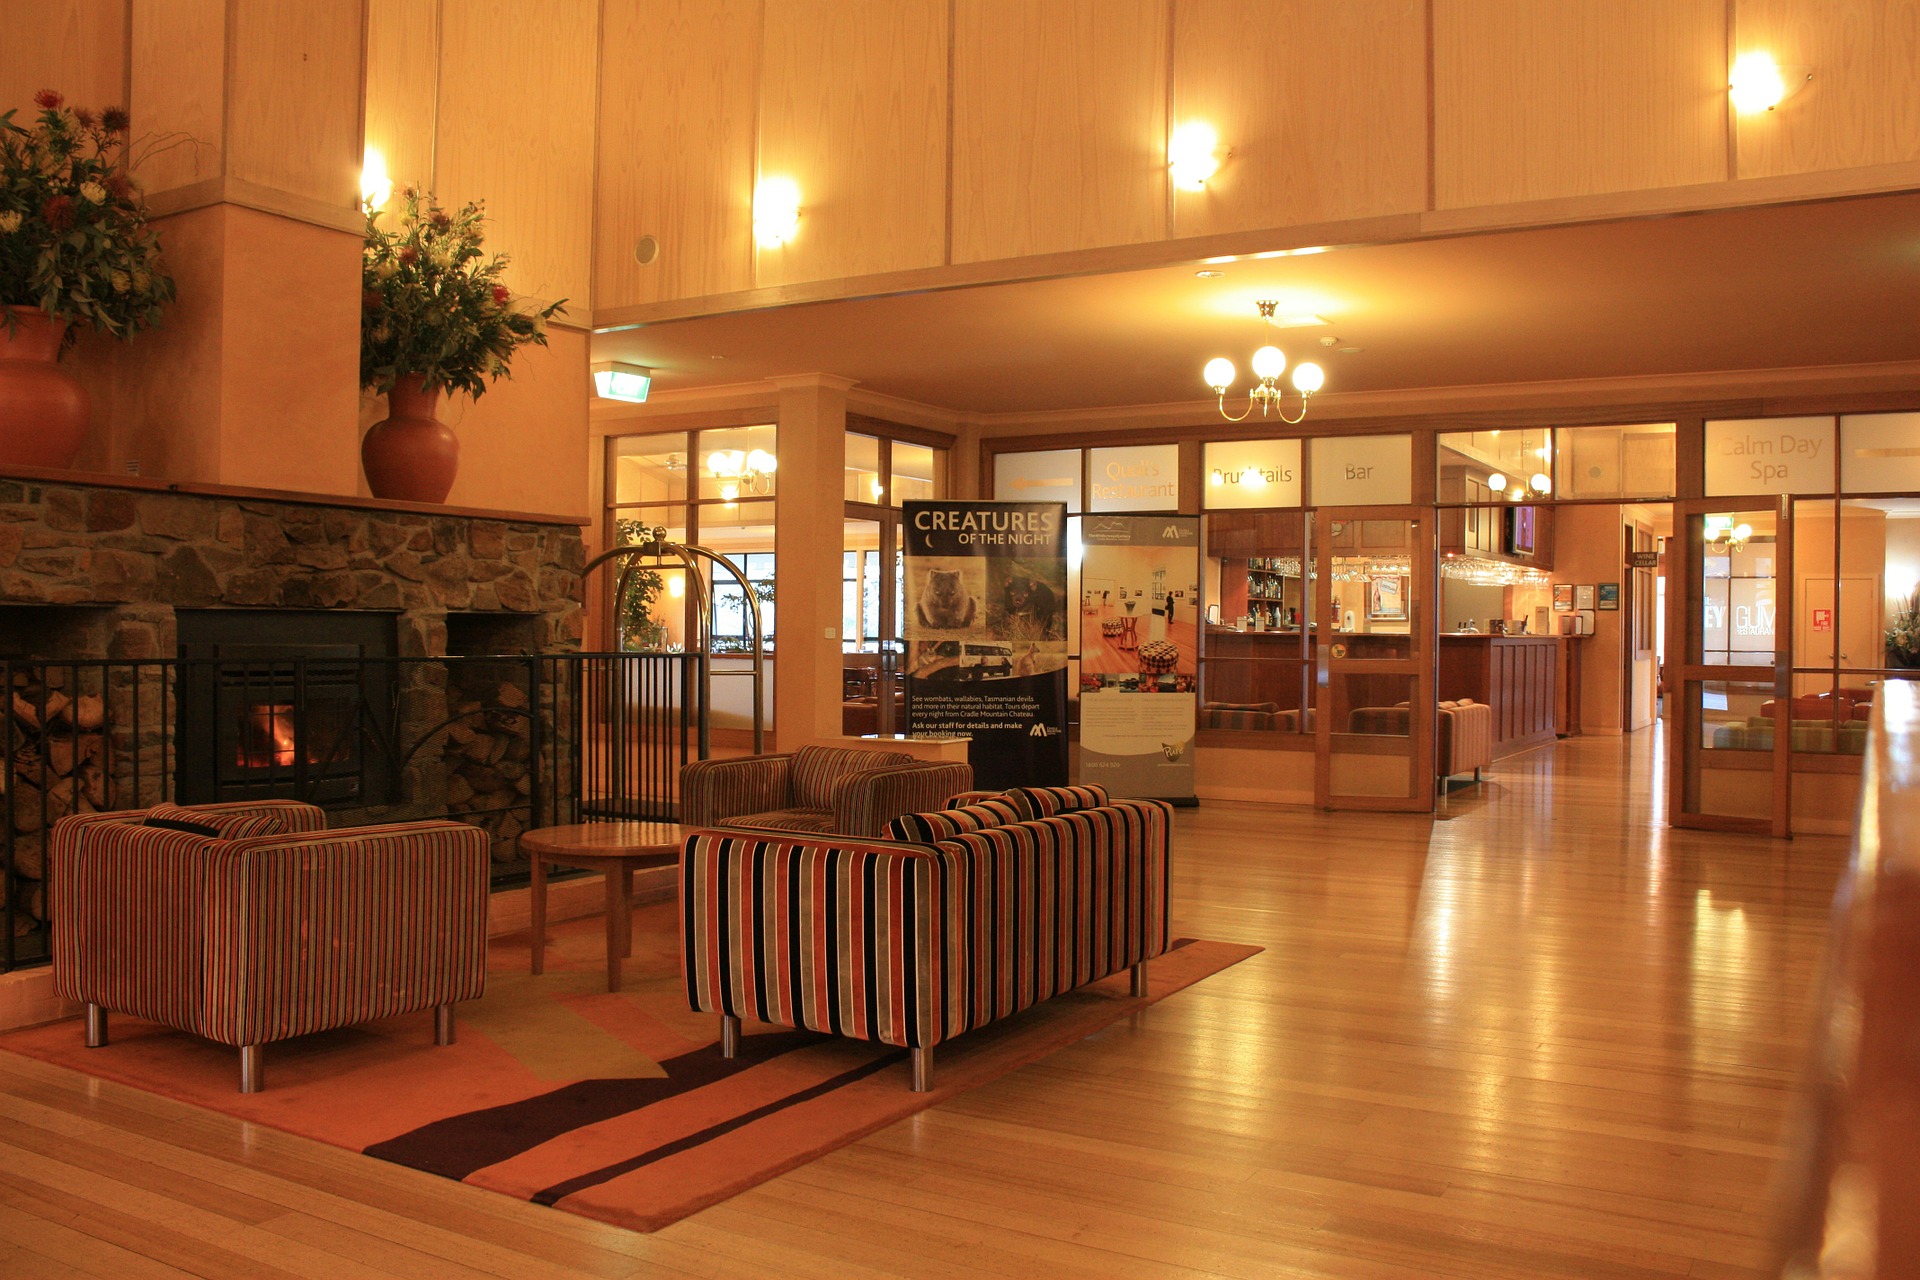 Renovating Guest Rooms? Don't Forget to Modernize Your Hotel Lobby